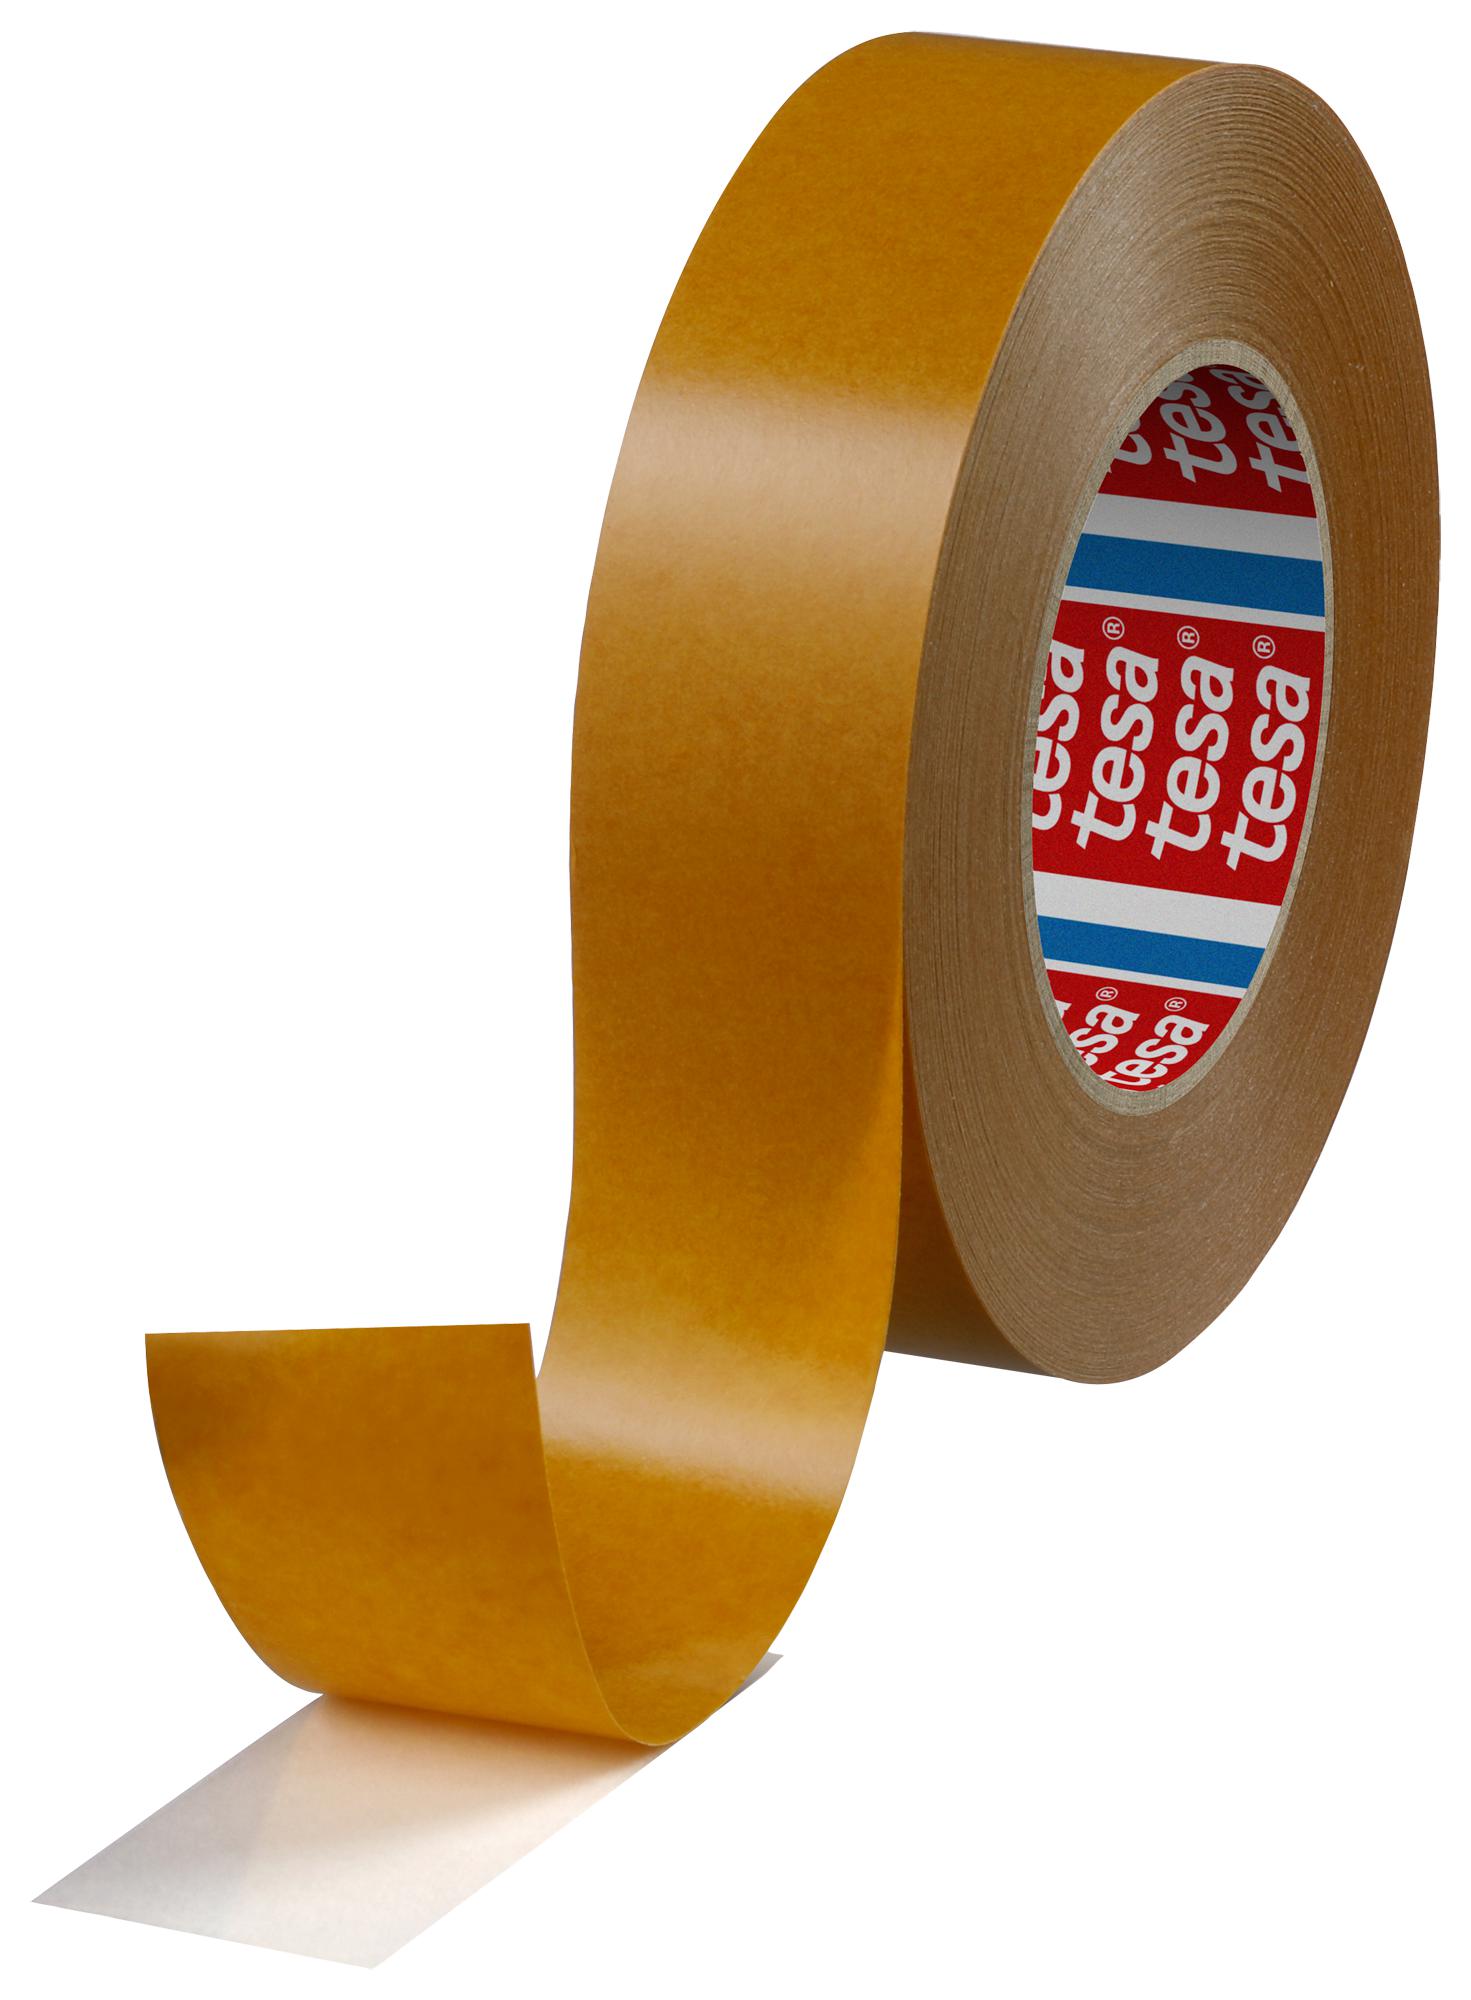 Tesa 51571-00002-00 Double Sided Tape, 50M X 38mm